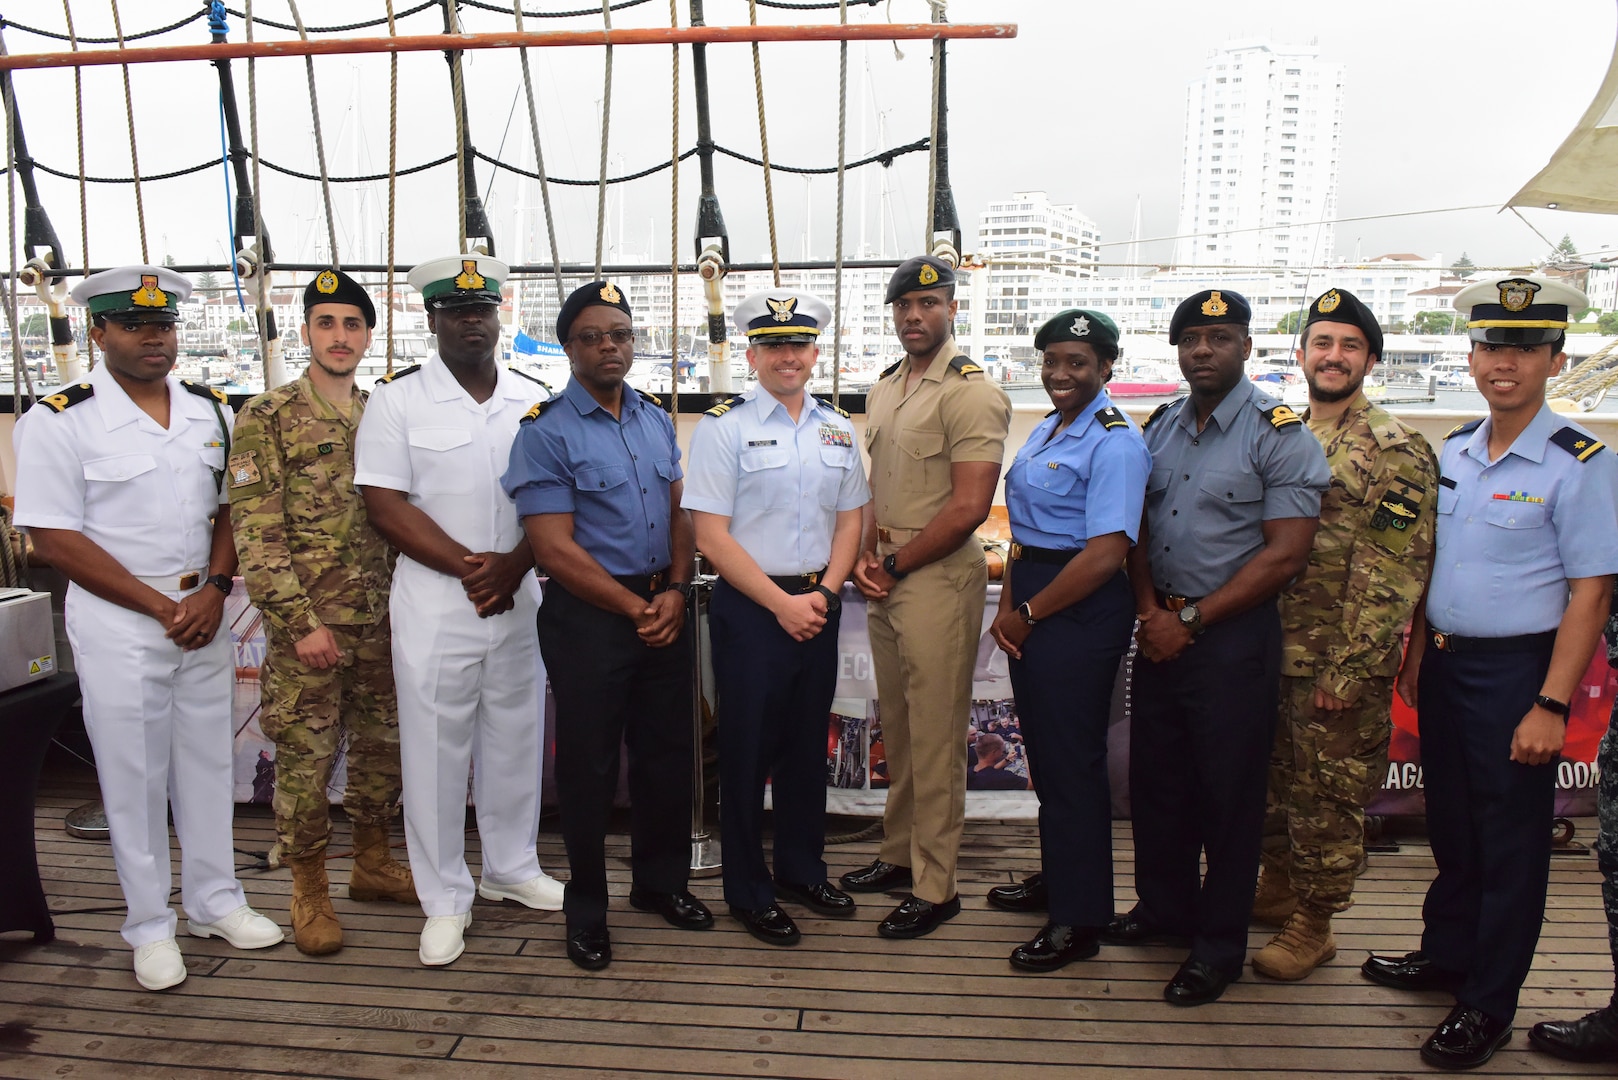 Foreign military personnel embarked aboard the USCGC Eagle (WIX 327) for its 2-week officer candidate school cruise pose for a group photo during a reception aboard Eagle, April 22, 2023, while moored in Ponta Delgada, Azores; from left to right: Sub-Lt. Oneil Campbell, Royal Bahamas Defence Force, Sub-Lt. Ahmad Dahboul, Lebanese Navy, Lt.j.g. Javano Edgecombe, Royal Bahamas Defense Force, Lt. George Lightfoot, Jamaican Defense Force, Lt. Cmdr. Joseph Schlosser, U.S. Coast Guard Direct Commission Officer Course, Chief, at the Leadership Development School, Sub-Lt. Davian Pryce, Jamaica Defence Force Coast Guard, Midshipman Kimberly Gittens, Barbados Defence Force, Lt. Elvardo Knowles, Royal Bahamas Defence Force, Sub. Lt Tony Abi Ramia, Lebanese Navy, and Ensign Ivanher Teyab, Philippine Coast Guard. Eagle conducted a four-month summer deployment to teach practical seamanship skills to officer candidates from the U.S. Coast Guard and National Oceanic and Atmospheric Administration Corps, foreign military personnel, and shared best practices with sailing organization Tall Ships America, while cadets and crew facilitated diplomatic engagements with U.S. allies in Northern Europe, the Portuguese archipelagos of the Azores and Madeira, and Bermuda. (U.S. Coast Guard photo by Petty Officer 2nd Class Brandon Hillard)